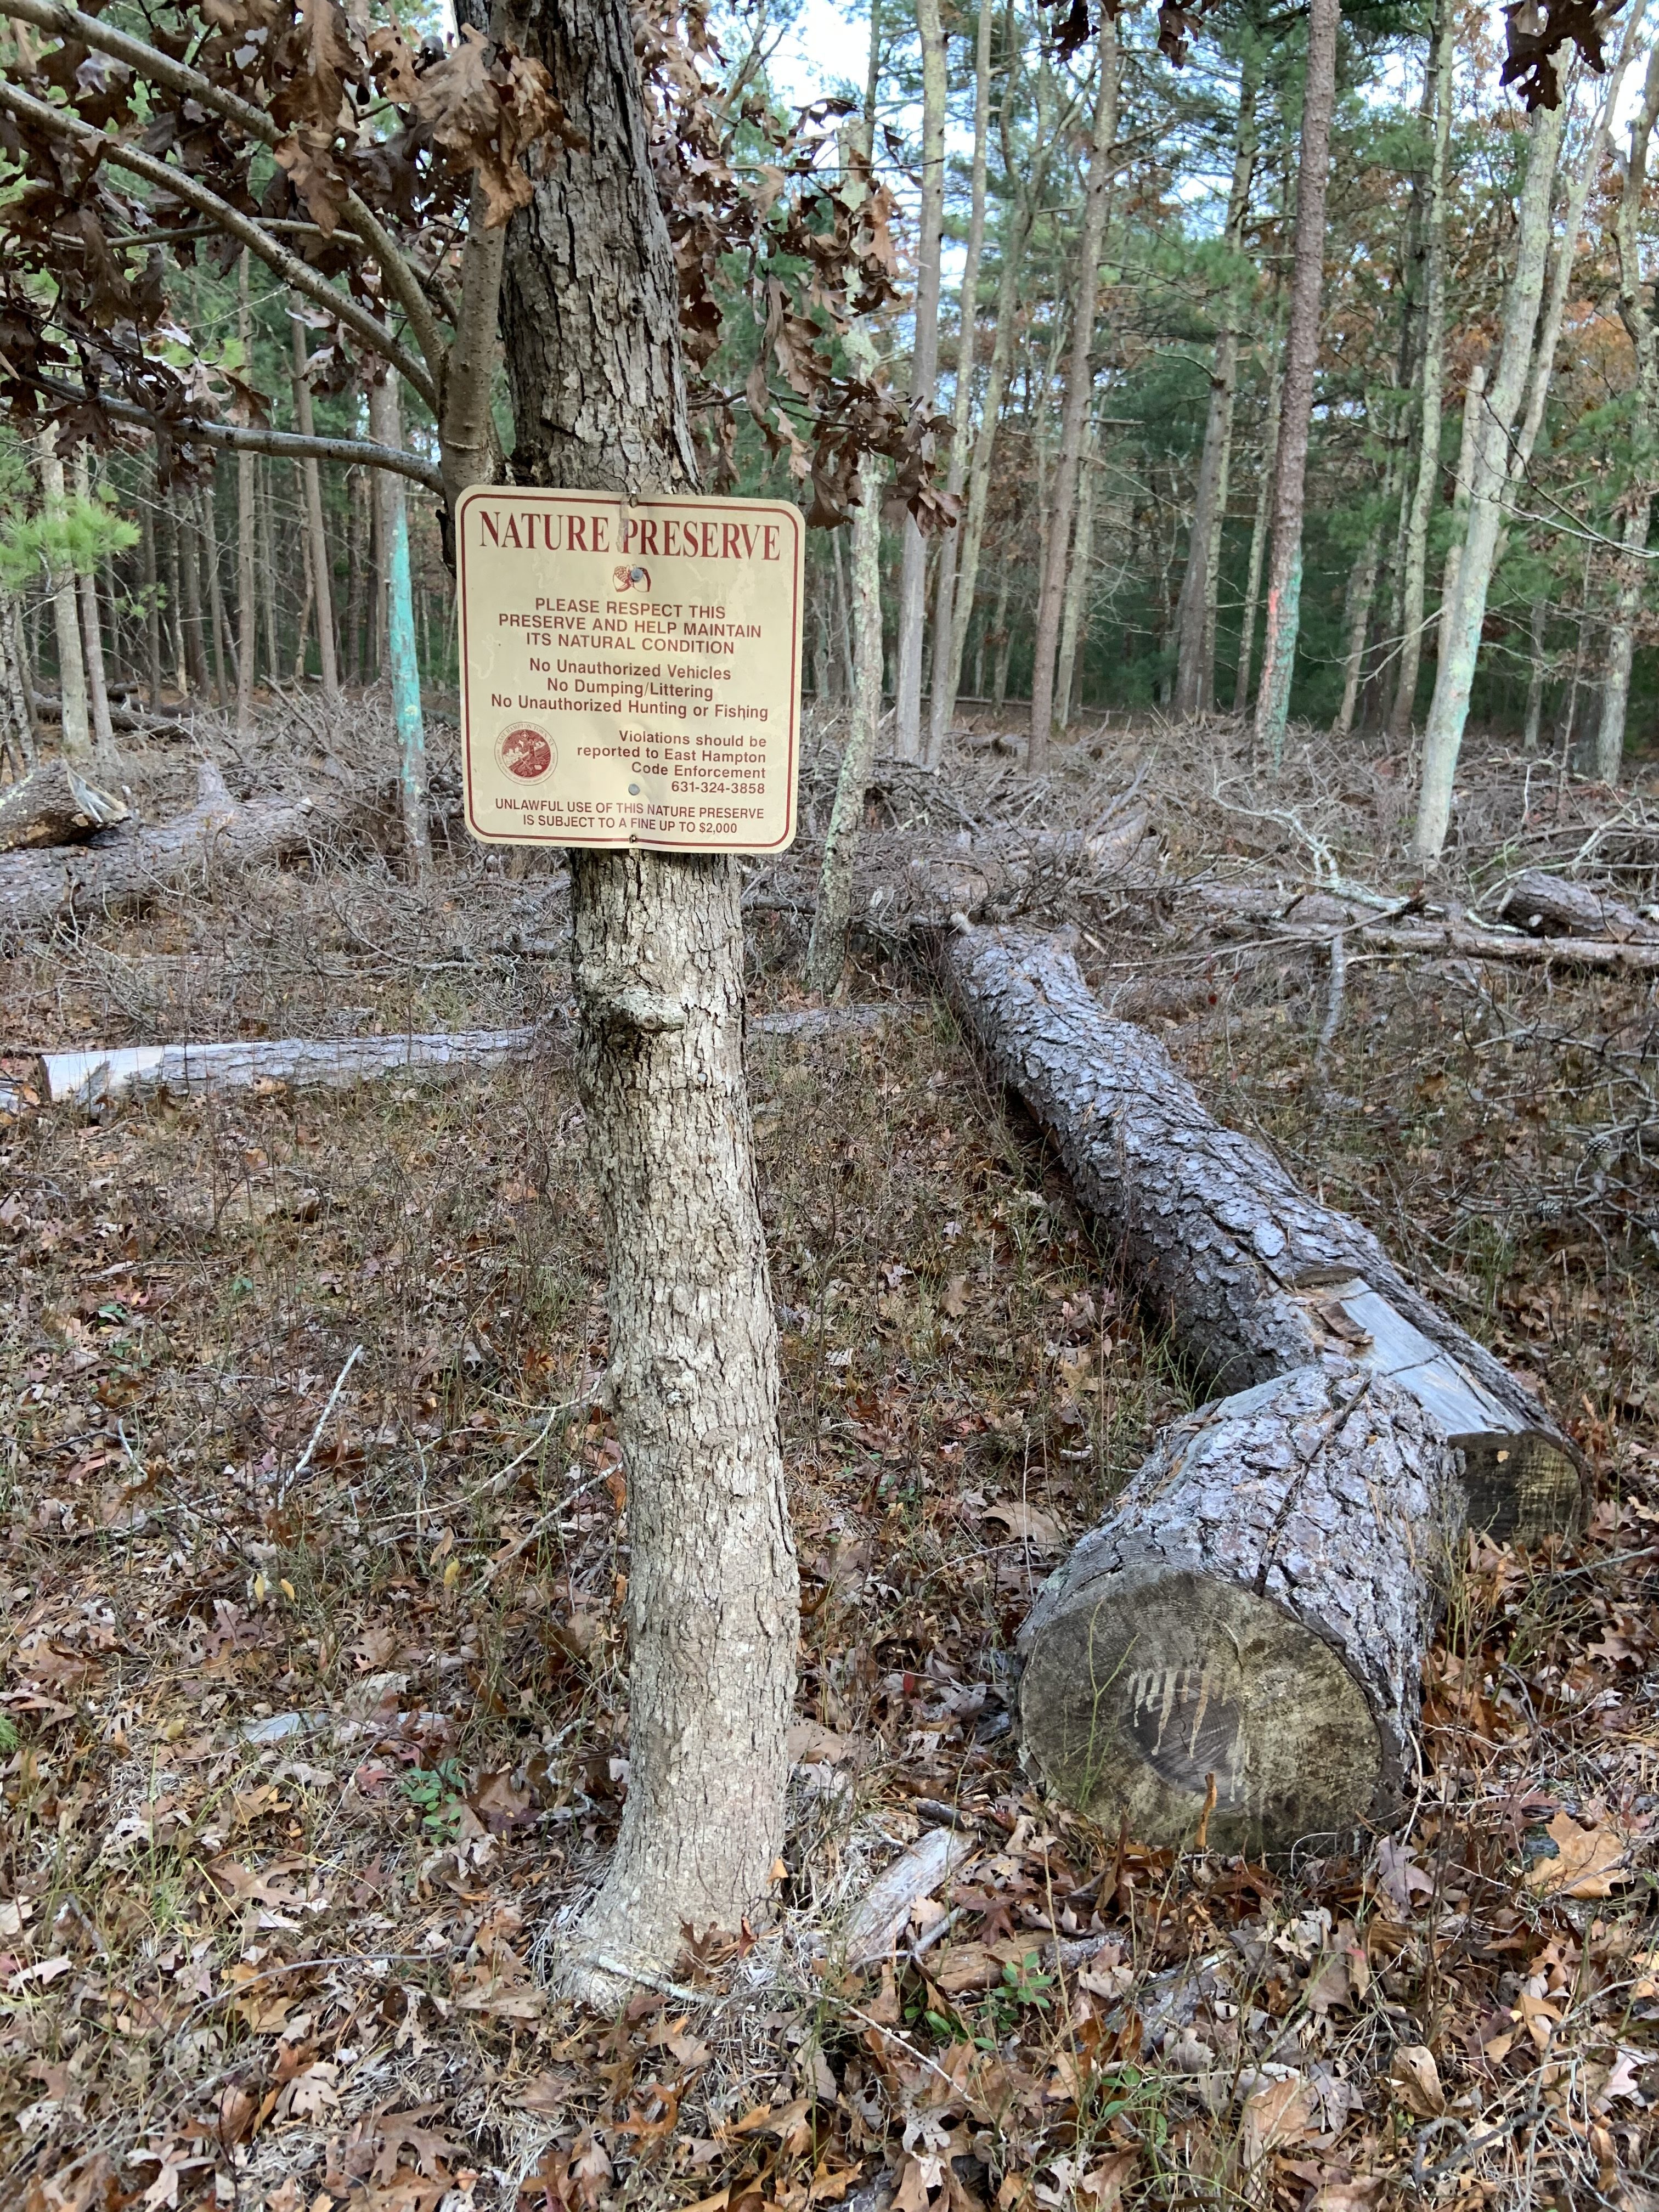 Trees that were cut down two years ago because they had been infested with southern pine beetles remain at 185 Swamp Road in Northwest Woods, East Hampton, prompting the owner to file suit claiming her property has been devalued. 